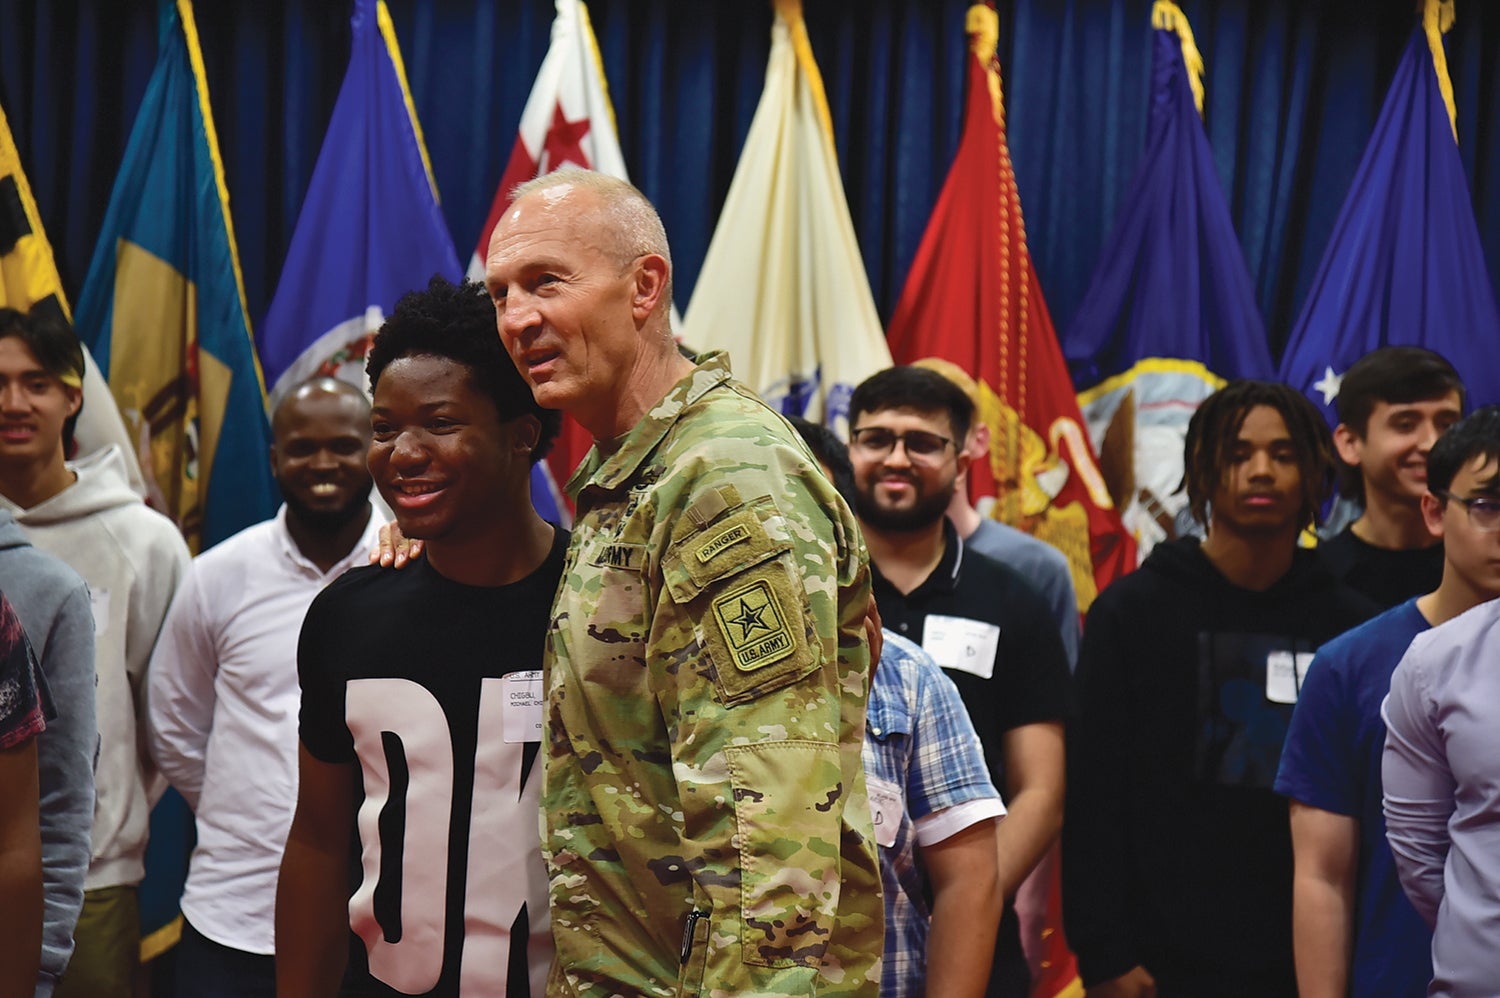 Army Vice Chief of Staff Gen. Randy George chats with a young enlistee during an enlistment event with 20 military recruits at Fort Meade, Maryland. (Credit: U.S. Army/Gloriann Martin)